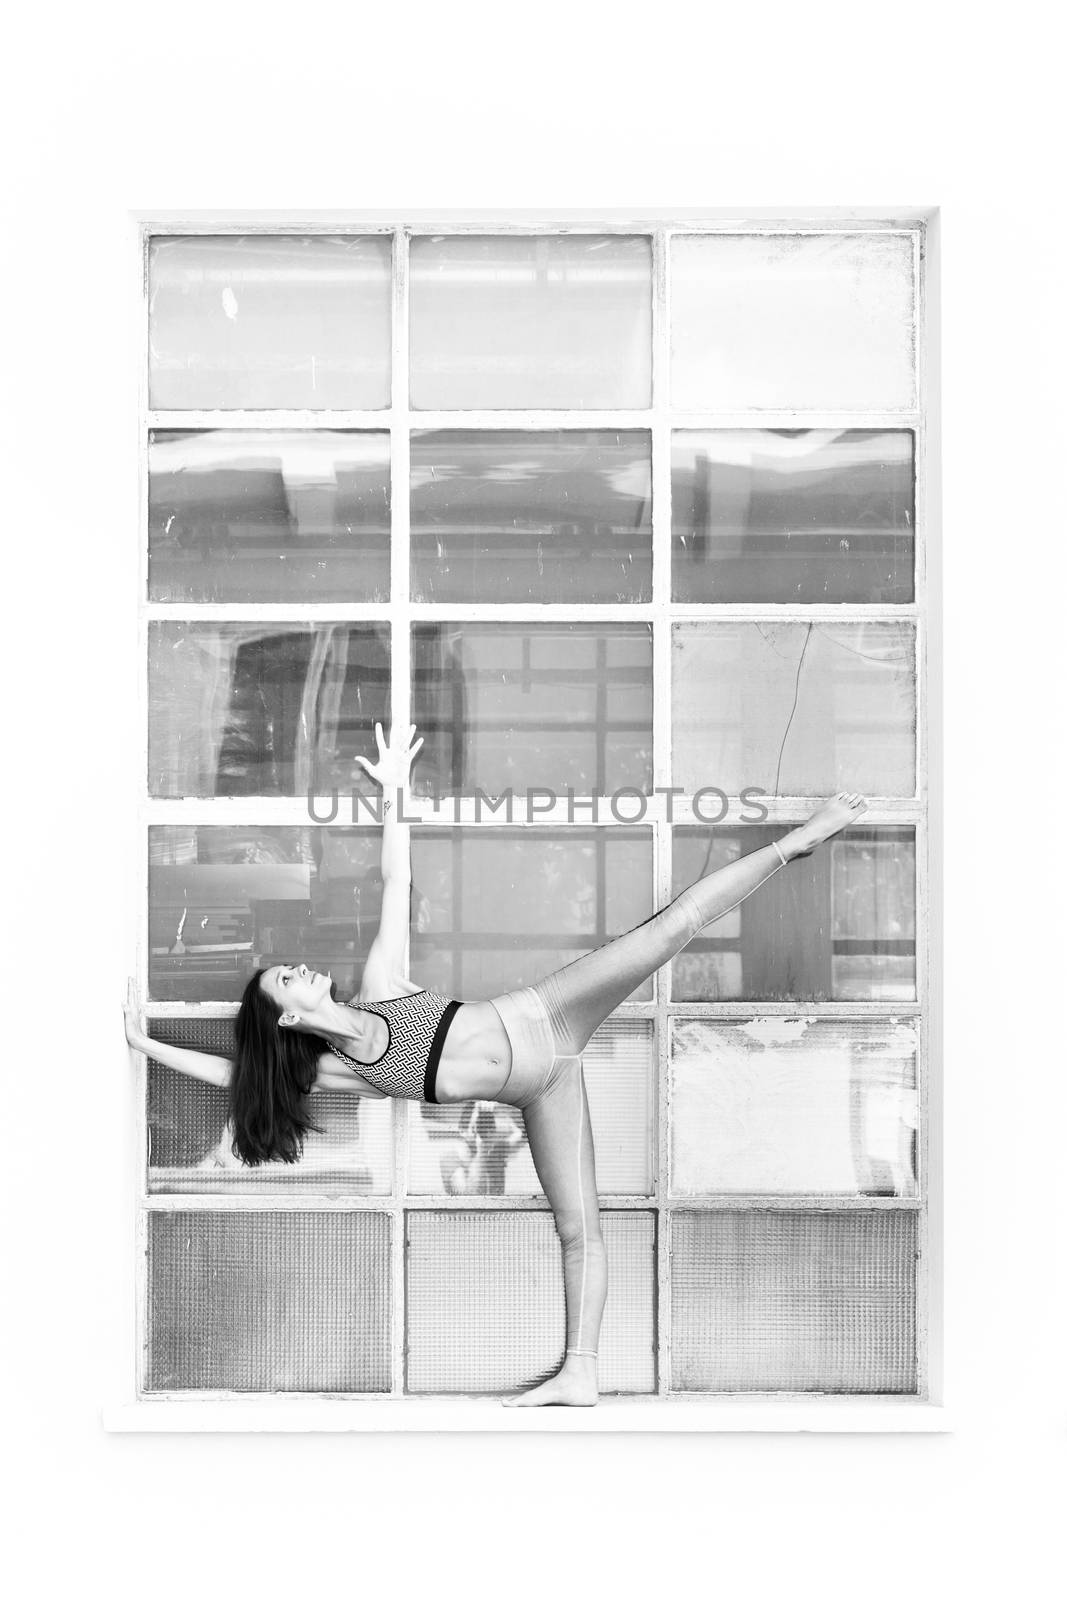 Fit sporty active girl in fashion sportswear doing yoga fitness exercise in front of big industrial window frame. colorful reflections in window glass. Urban style yoga. Black and white.